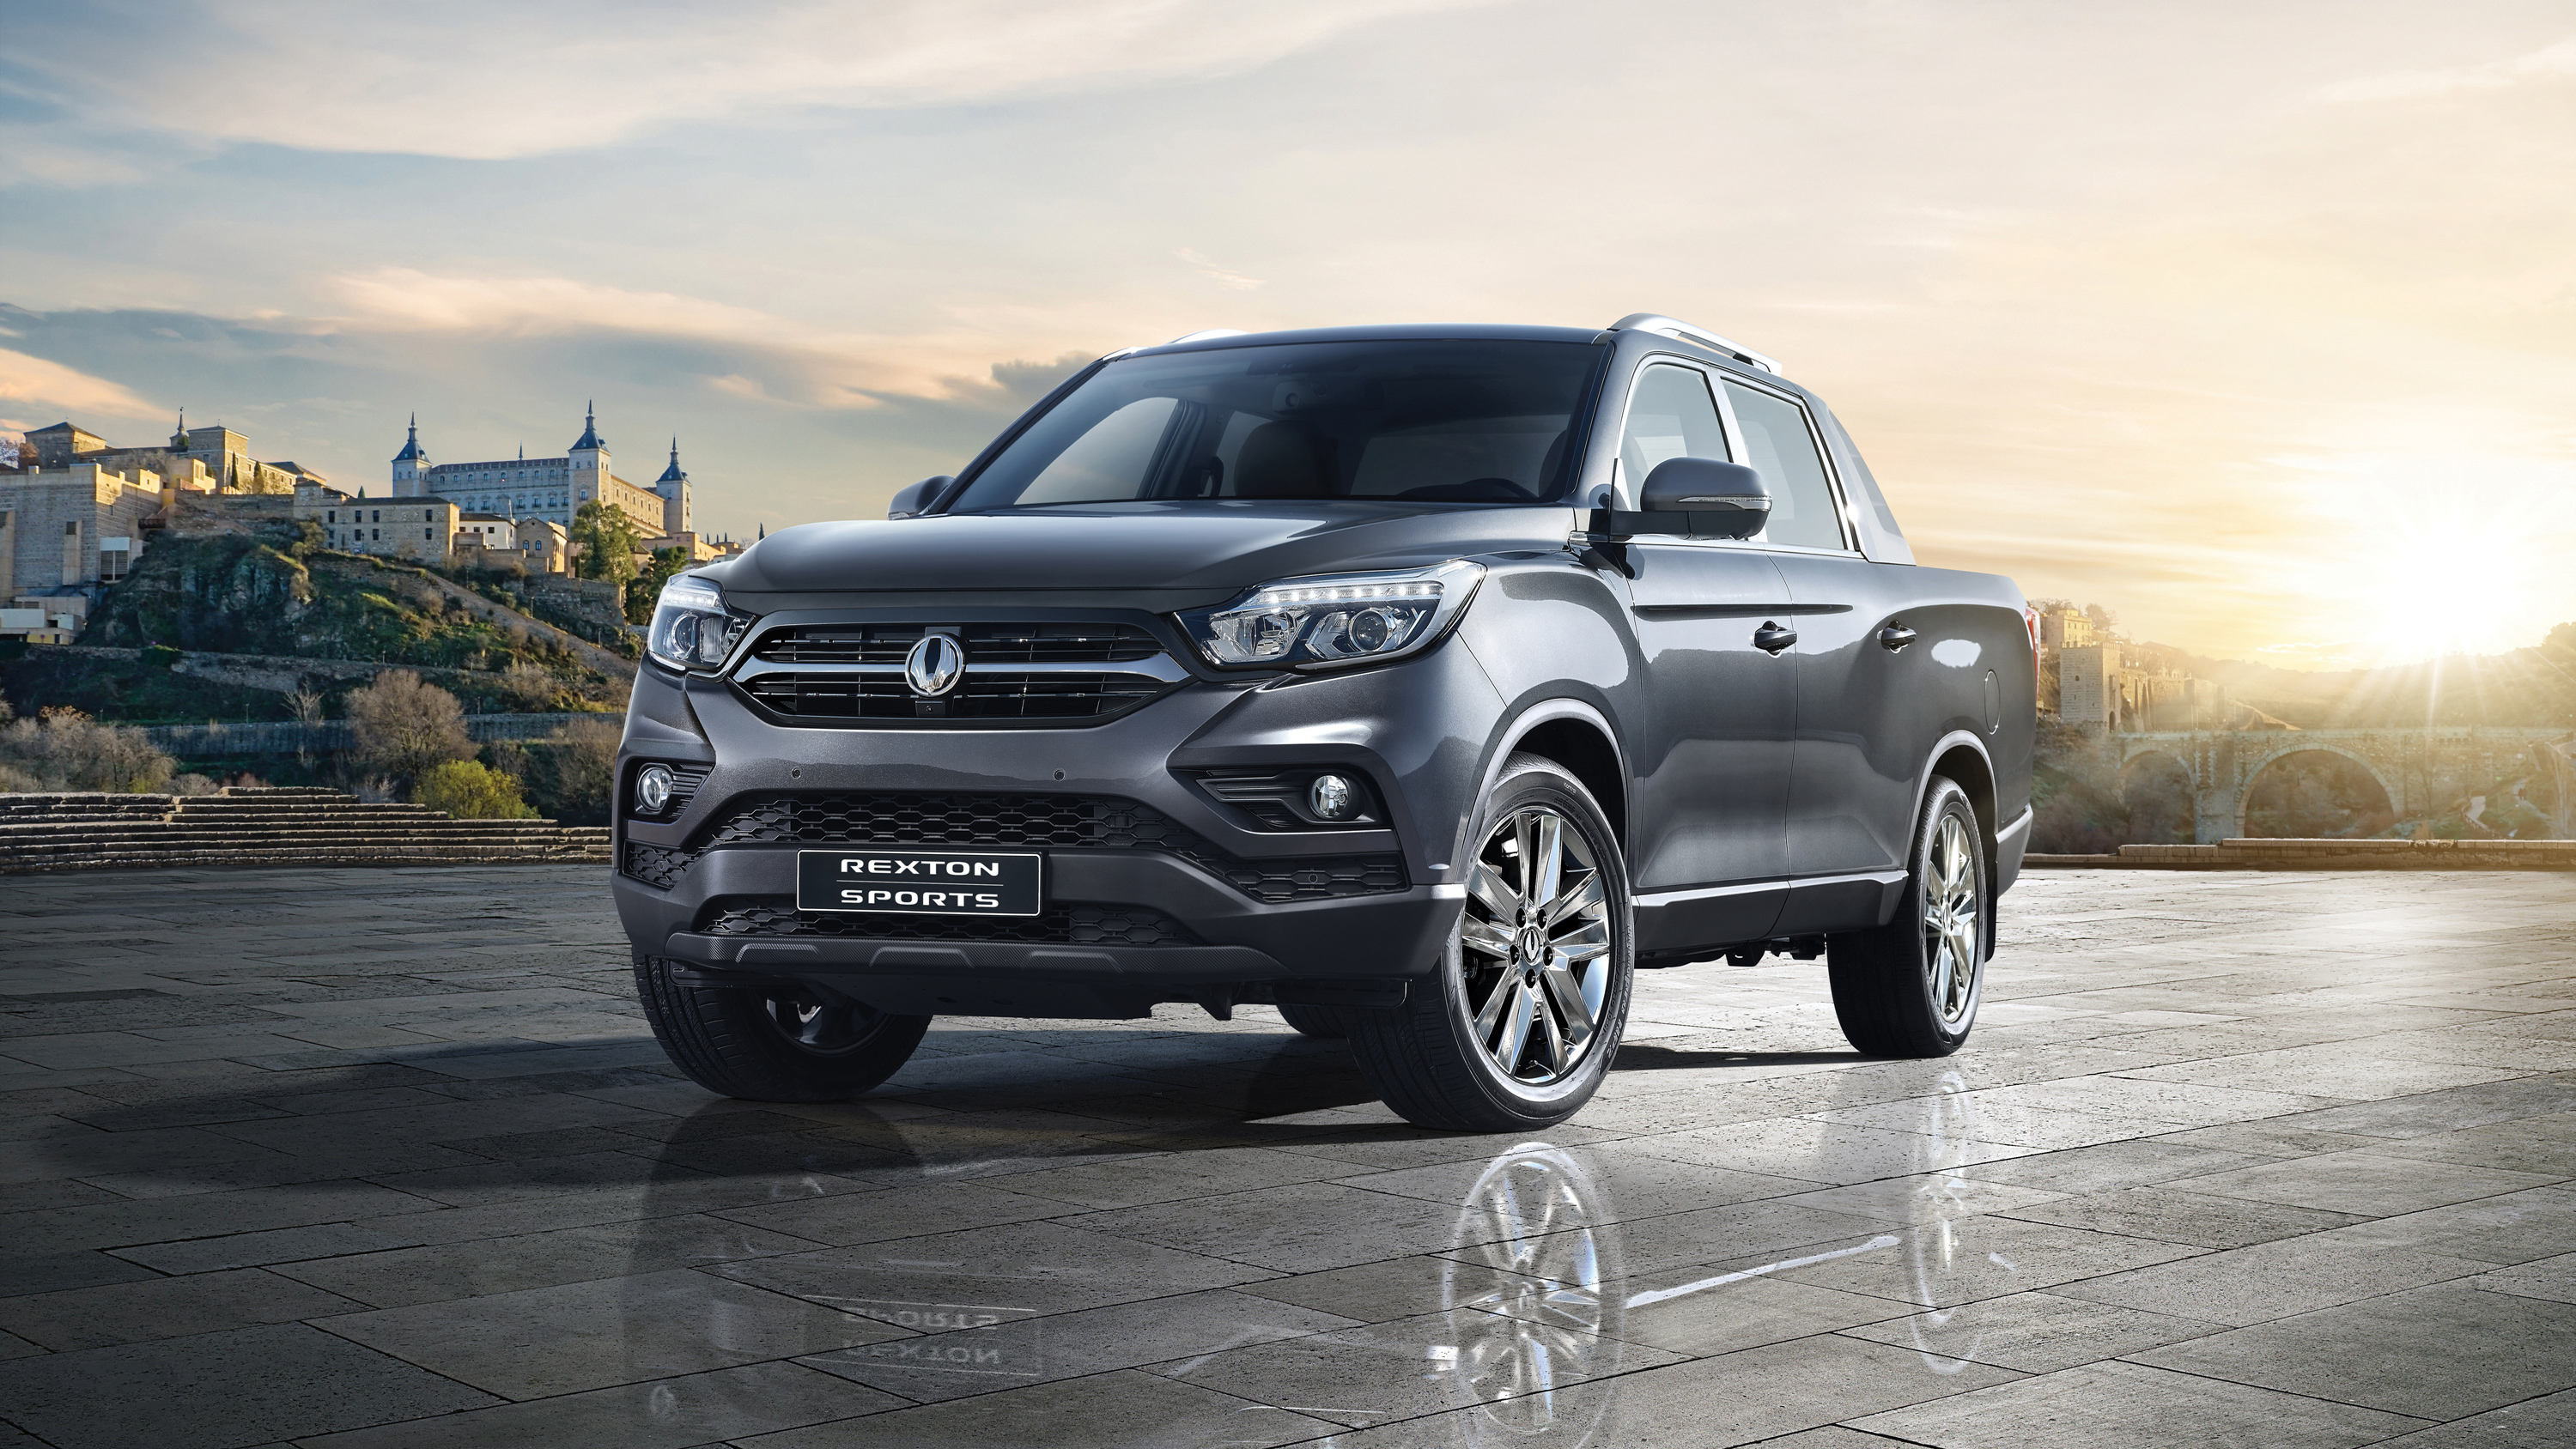 Ssangyong Wallpapers